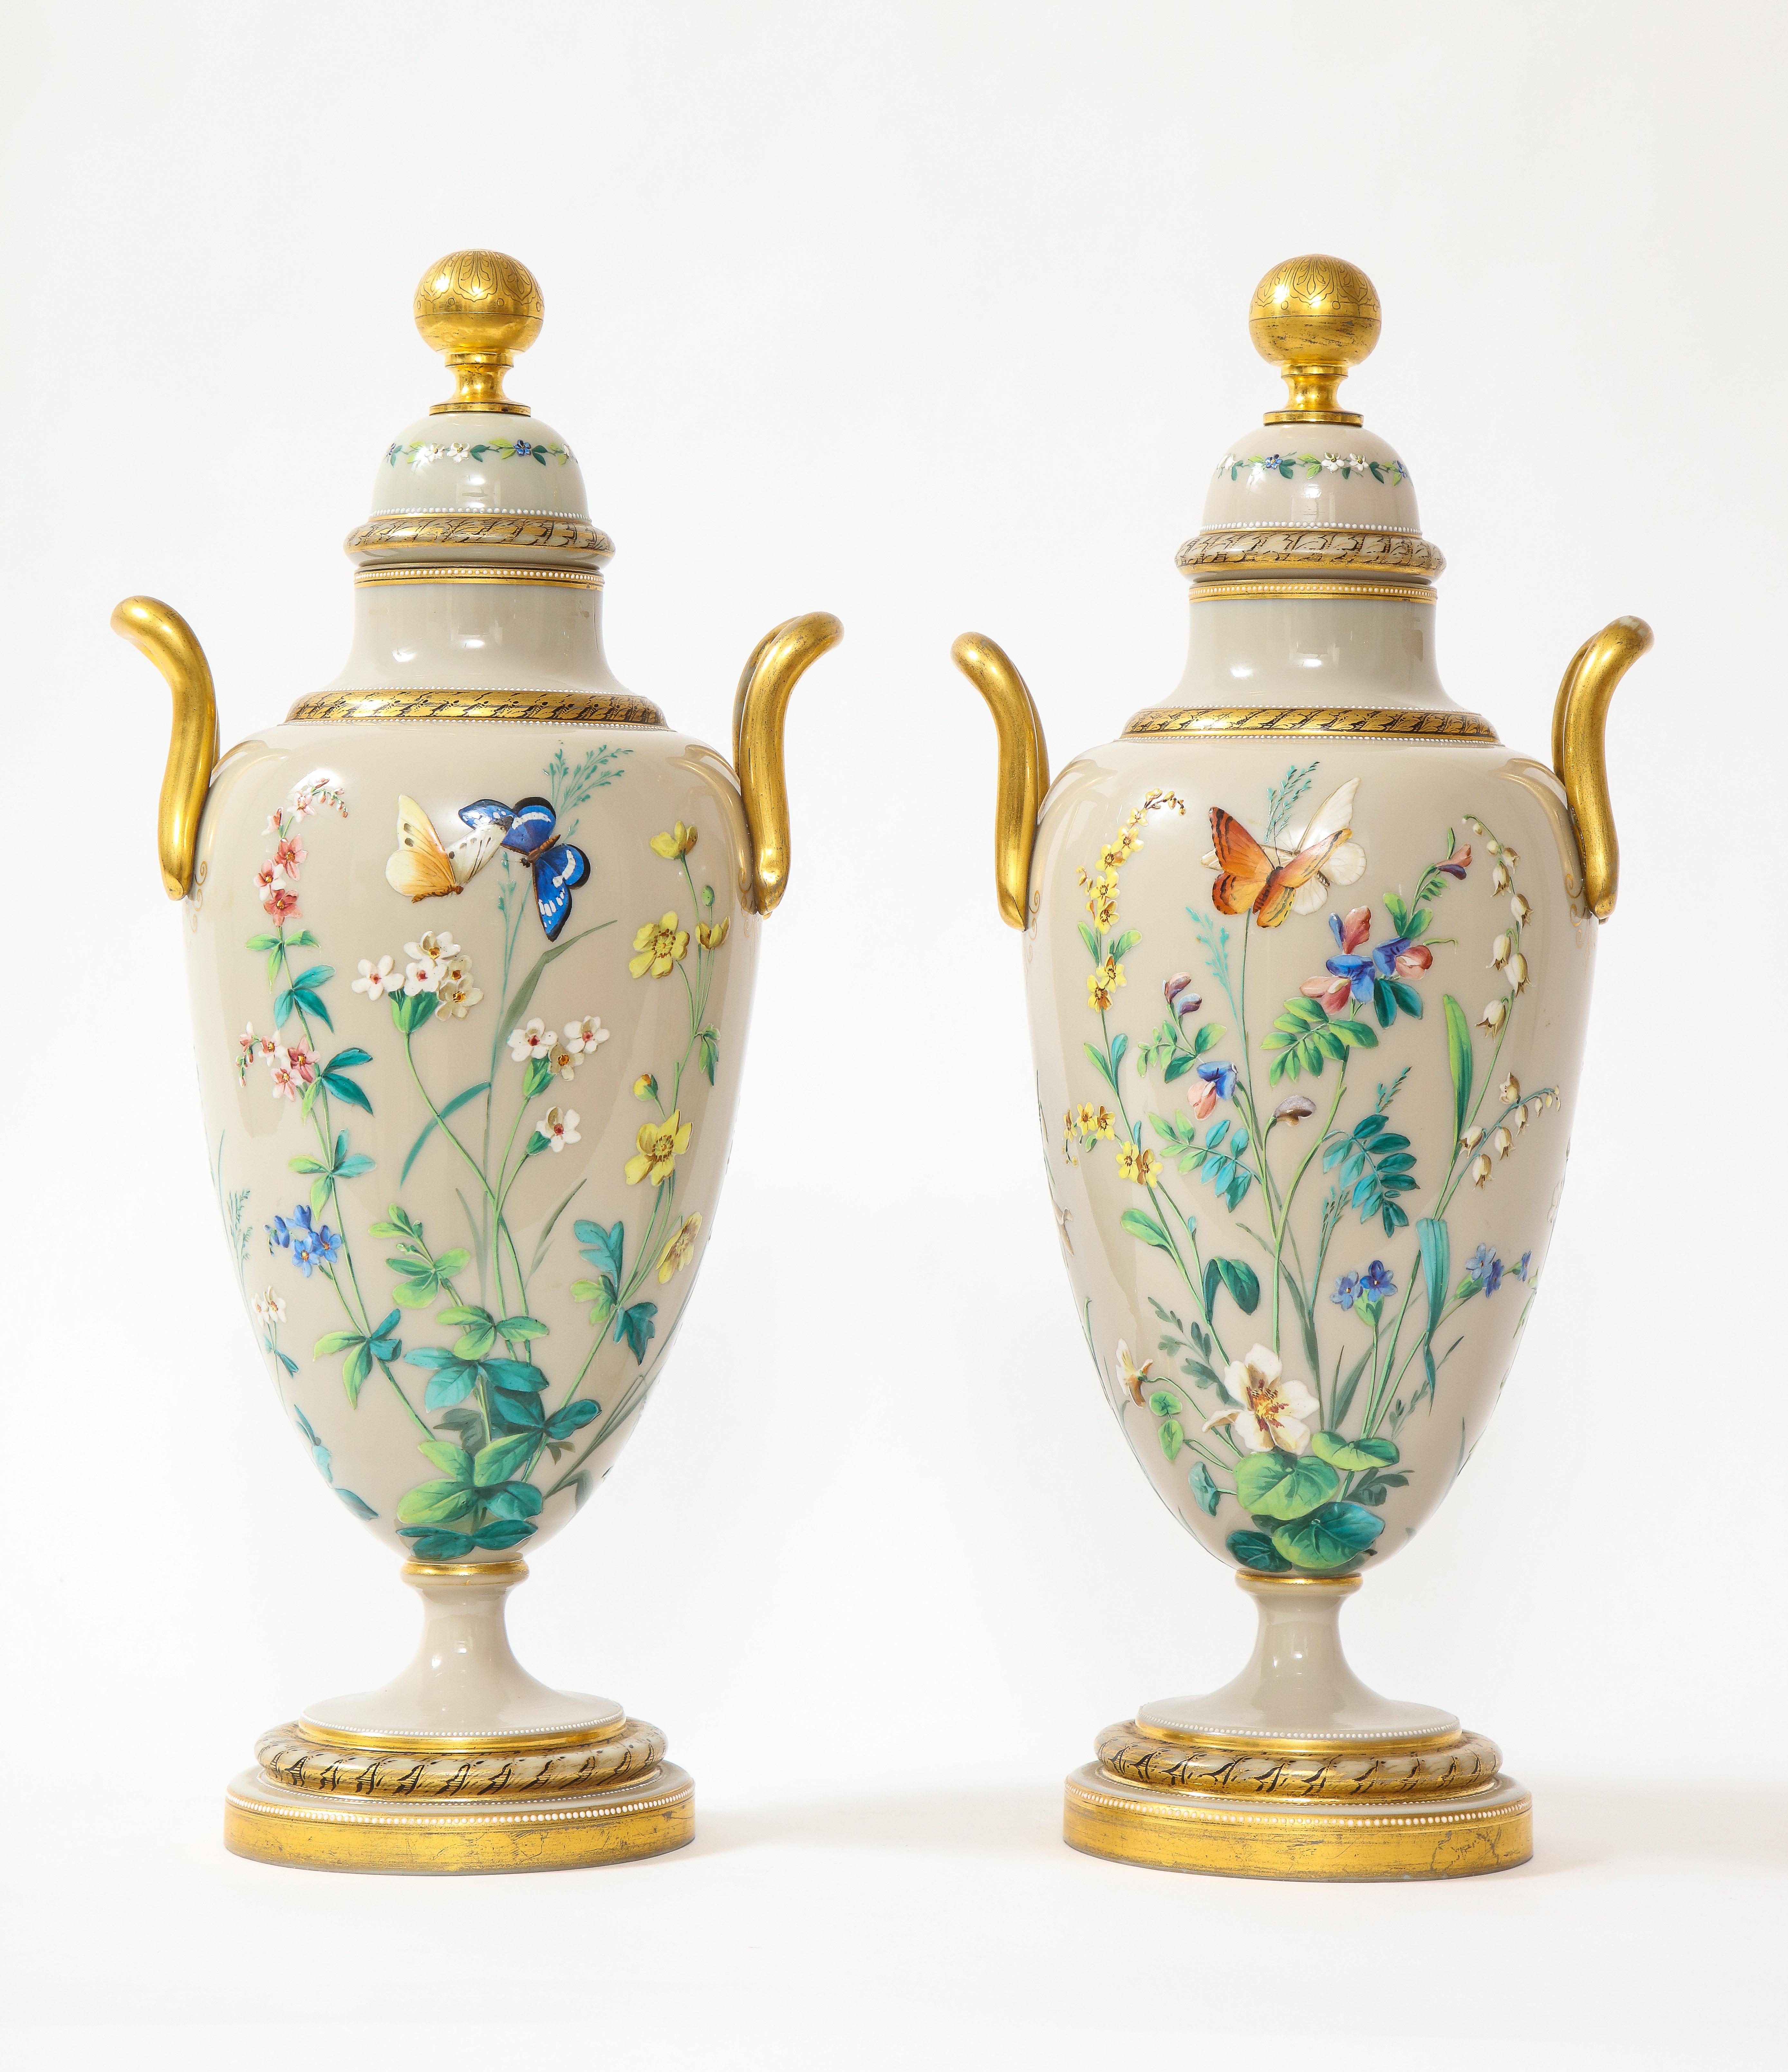 A fantastic and quite large pair of French Louis XVI style Baccarat grey opalescent ground hand-enameled vases with 24k gold decoration. Each is exquisitely hand-made with a fine opalescent grey ground crystal body and cover, each with finely